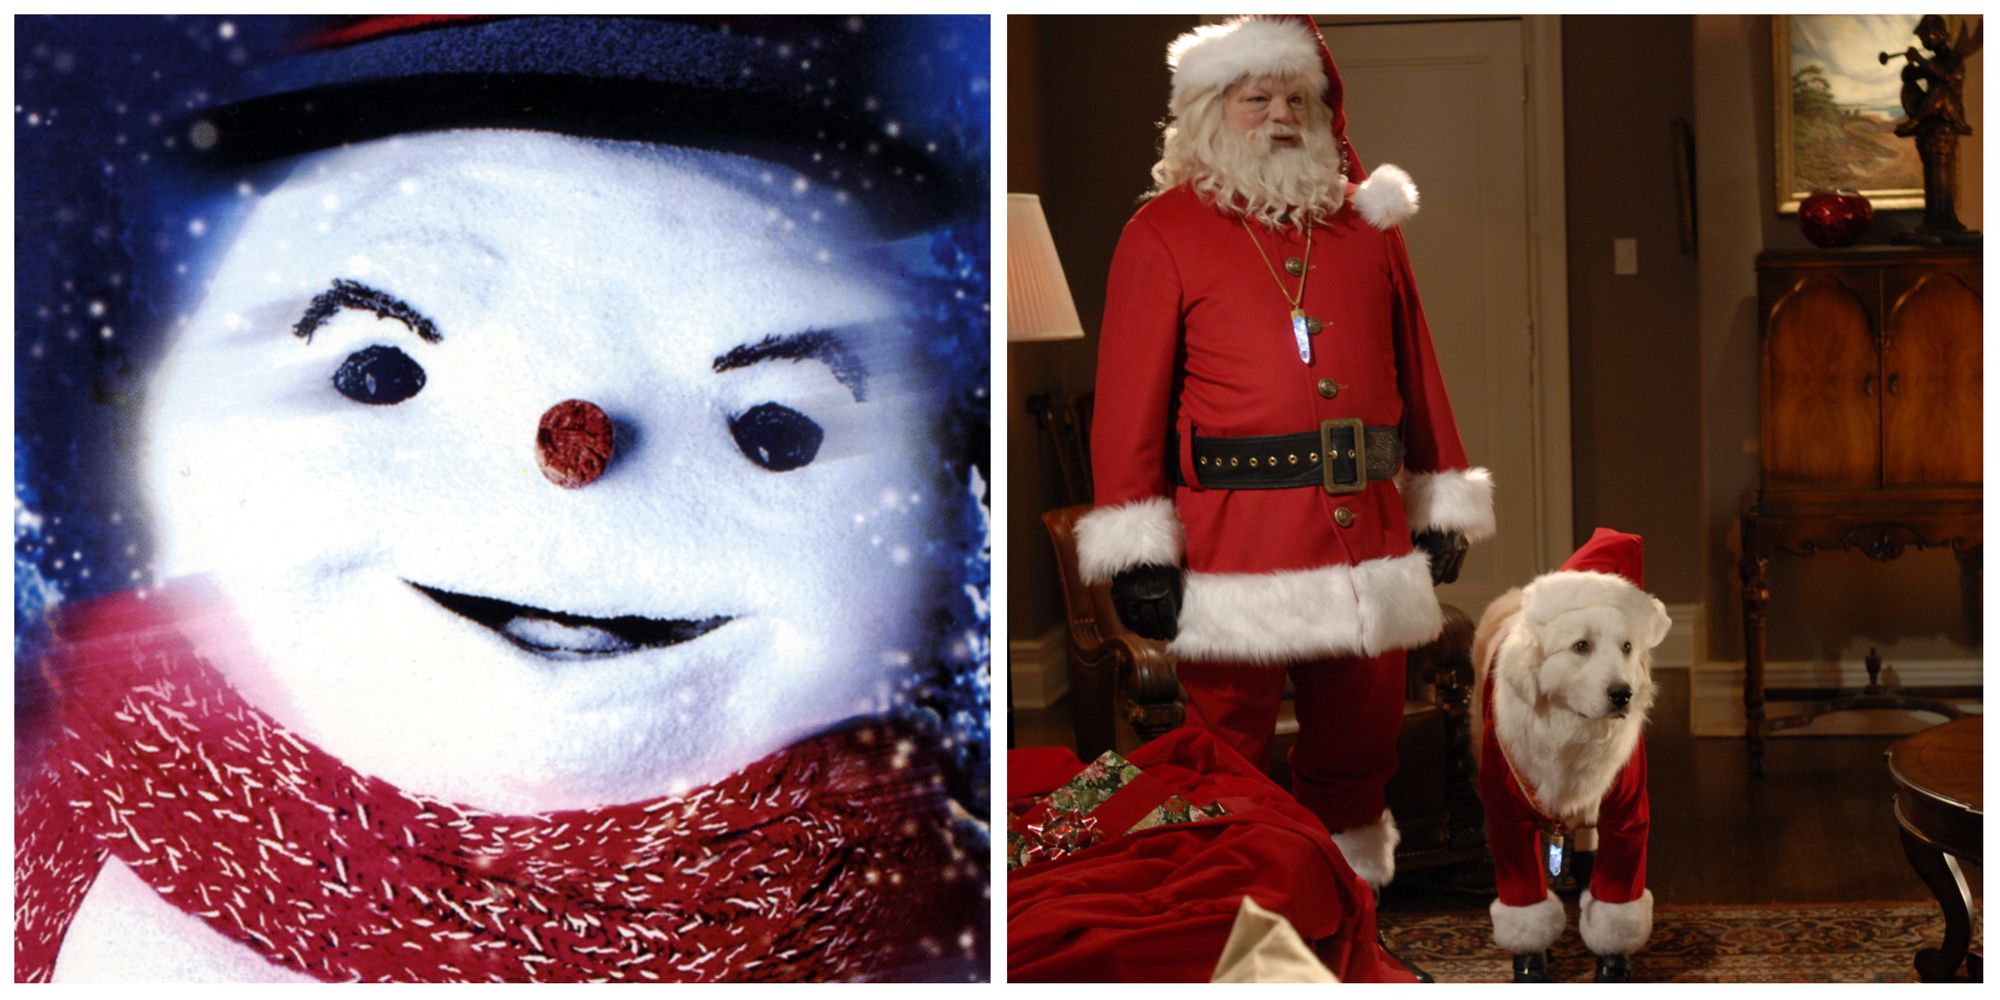 Split Image of Jack Frost and Santa Paws